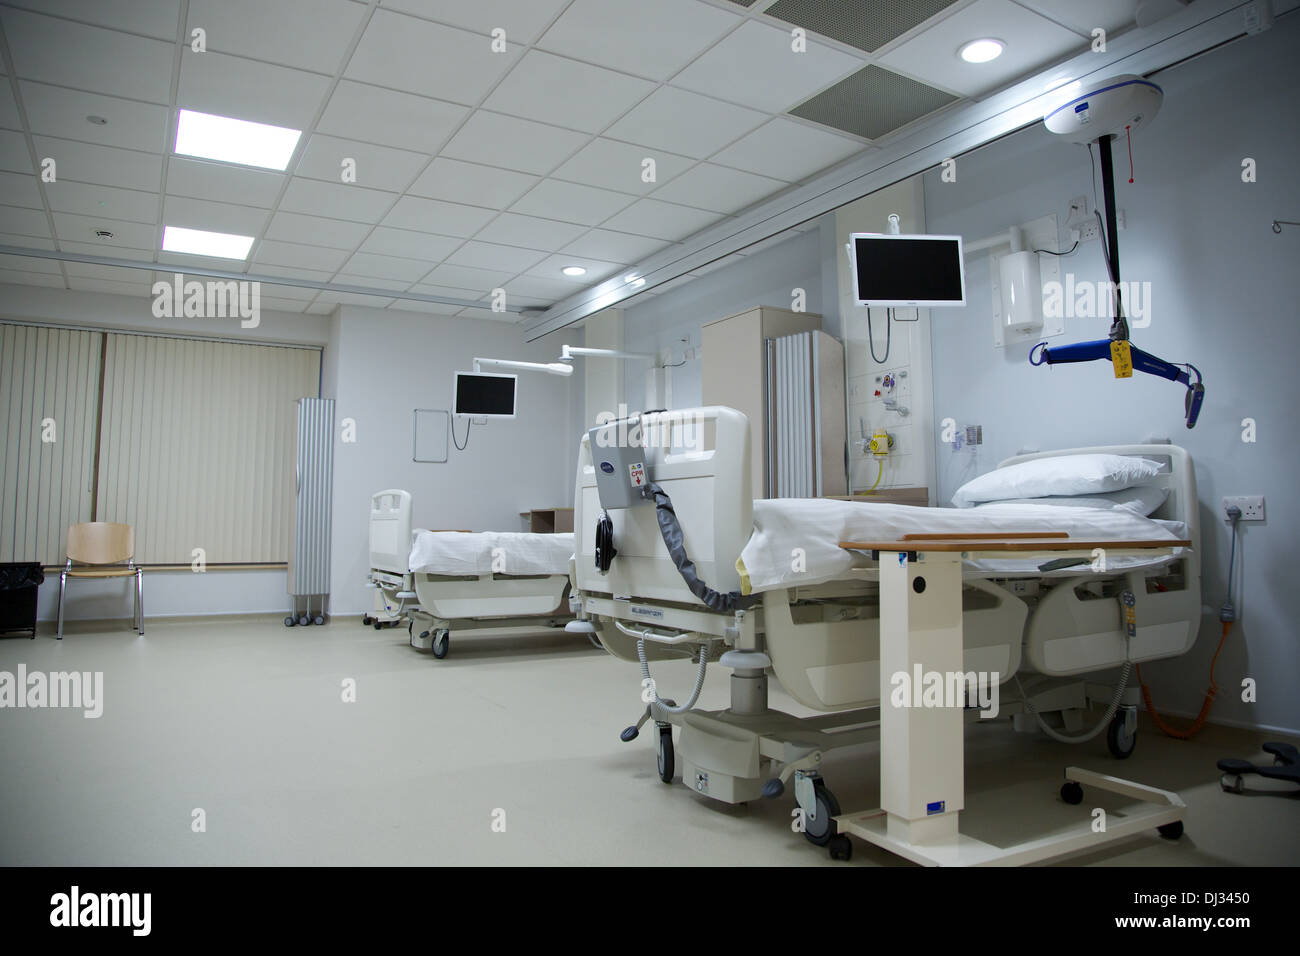 Brand new NHS Hospital Ward with beds and equipment Stock Photo